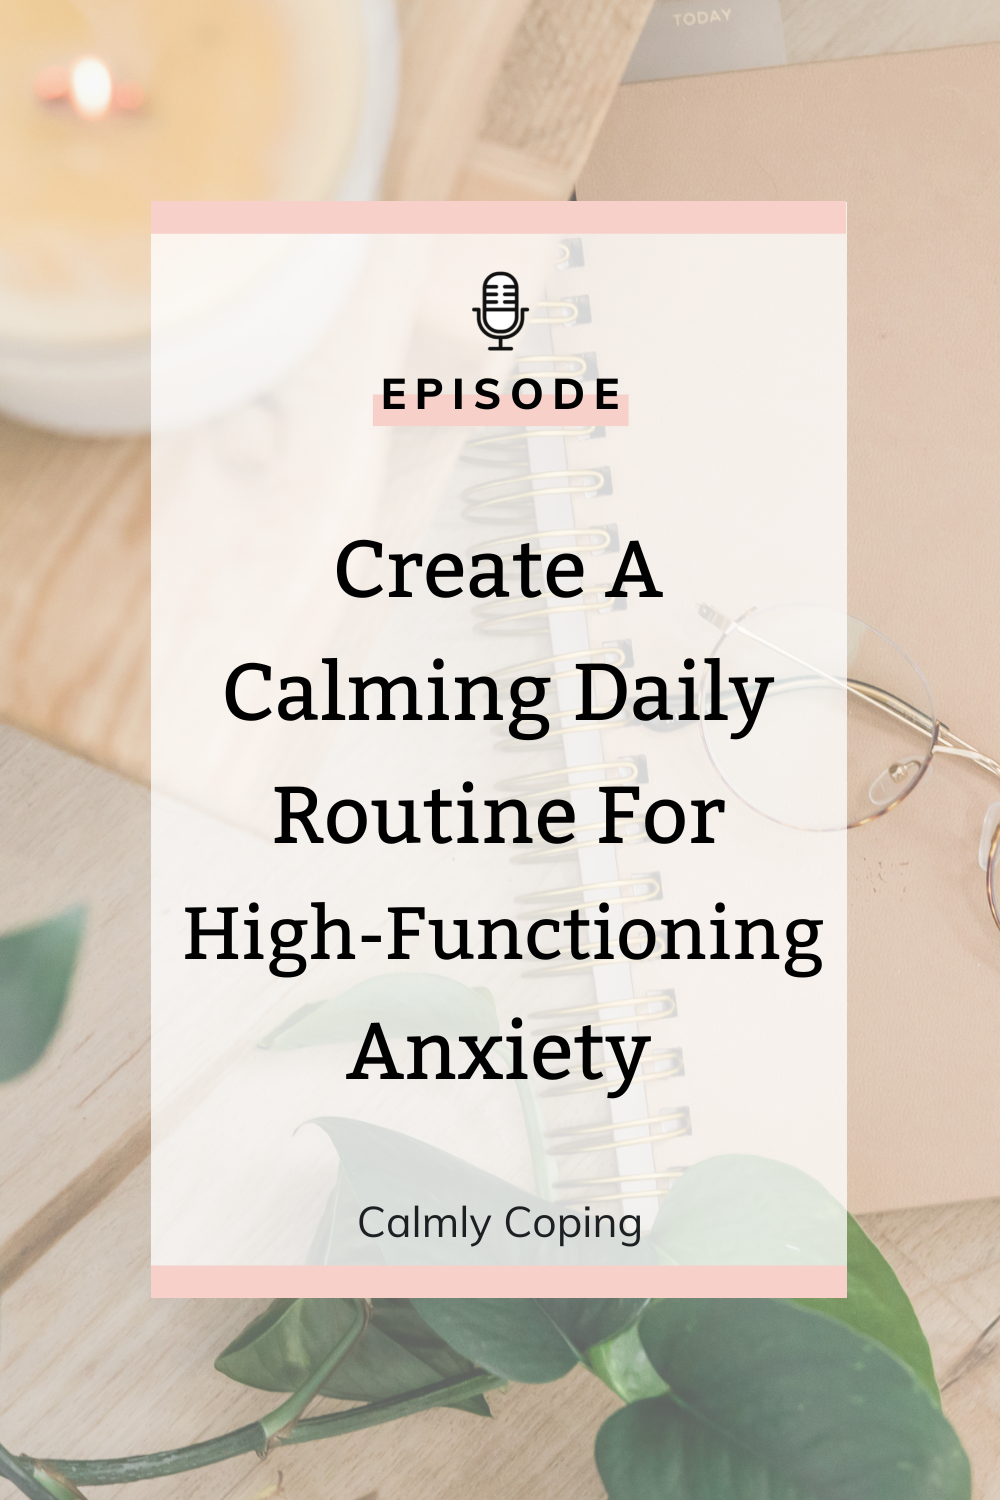 Create A Calming Daily Routine For High-Functioning Anxiety